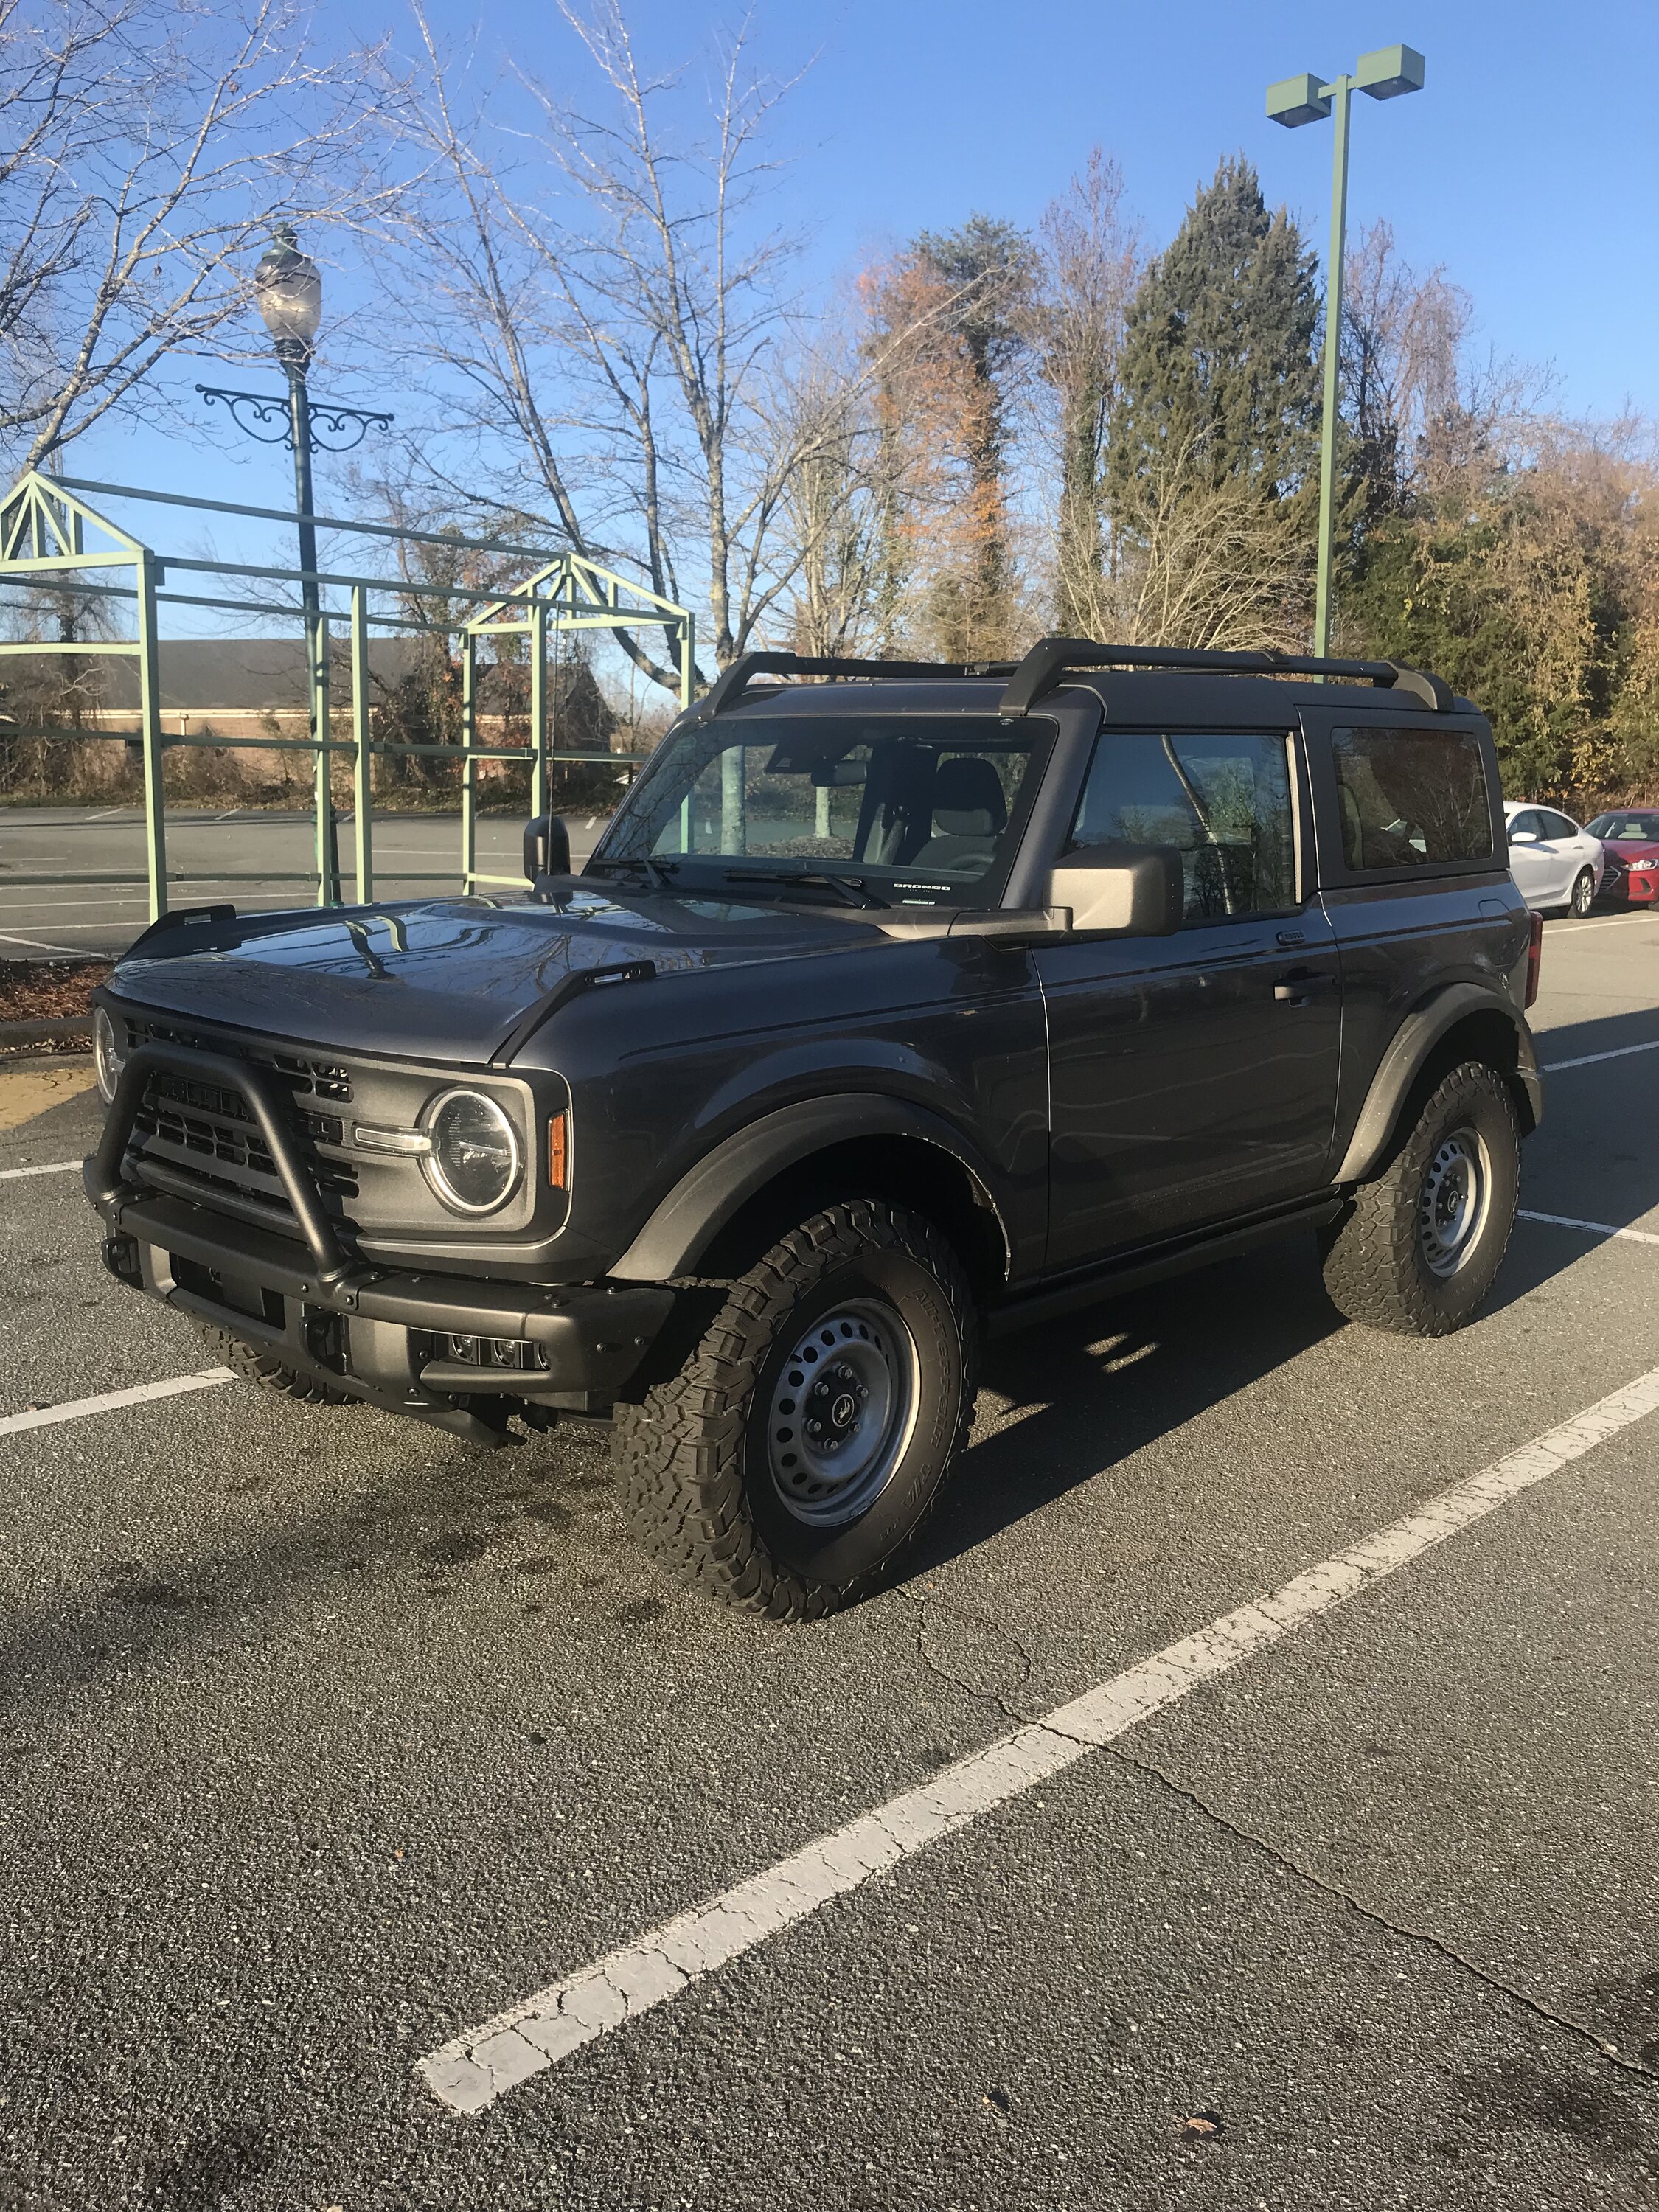 Ford Bronco Then & Now: show your assembly line Bronco and current Bronco picture Buddy at Lowes - 29NOV2022